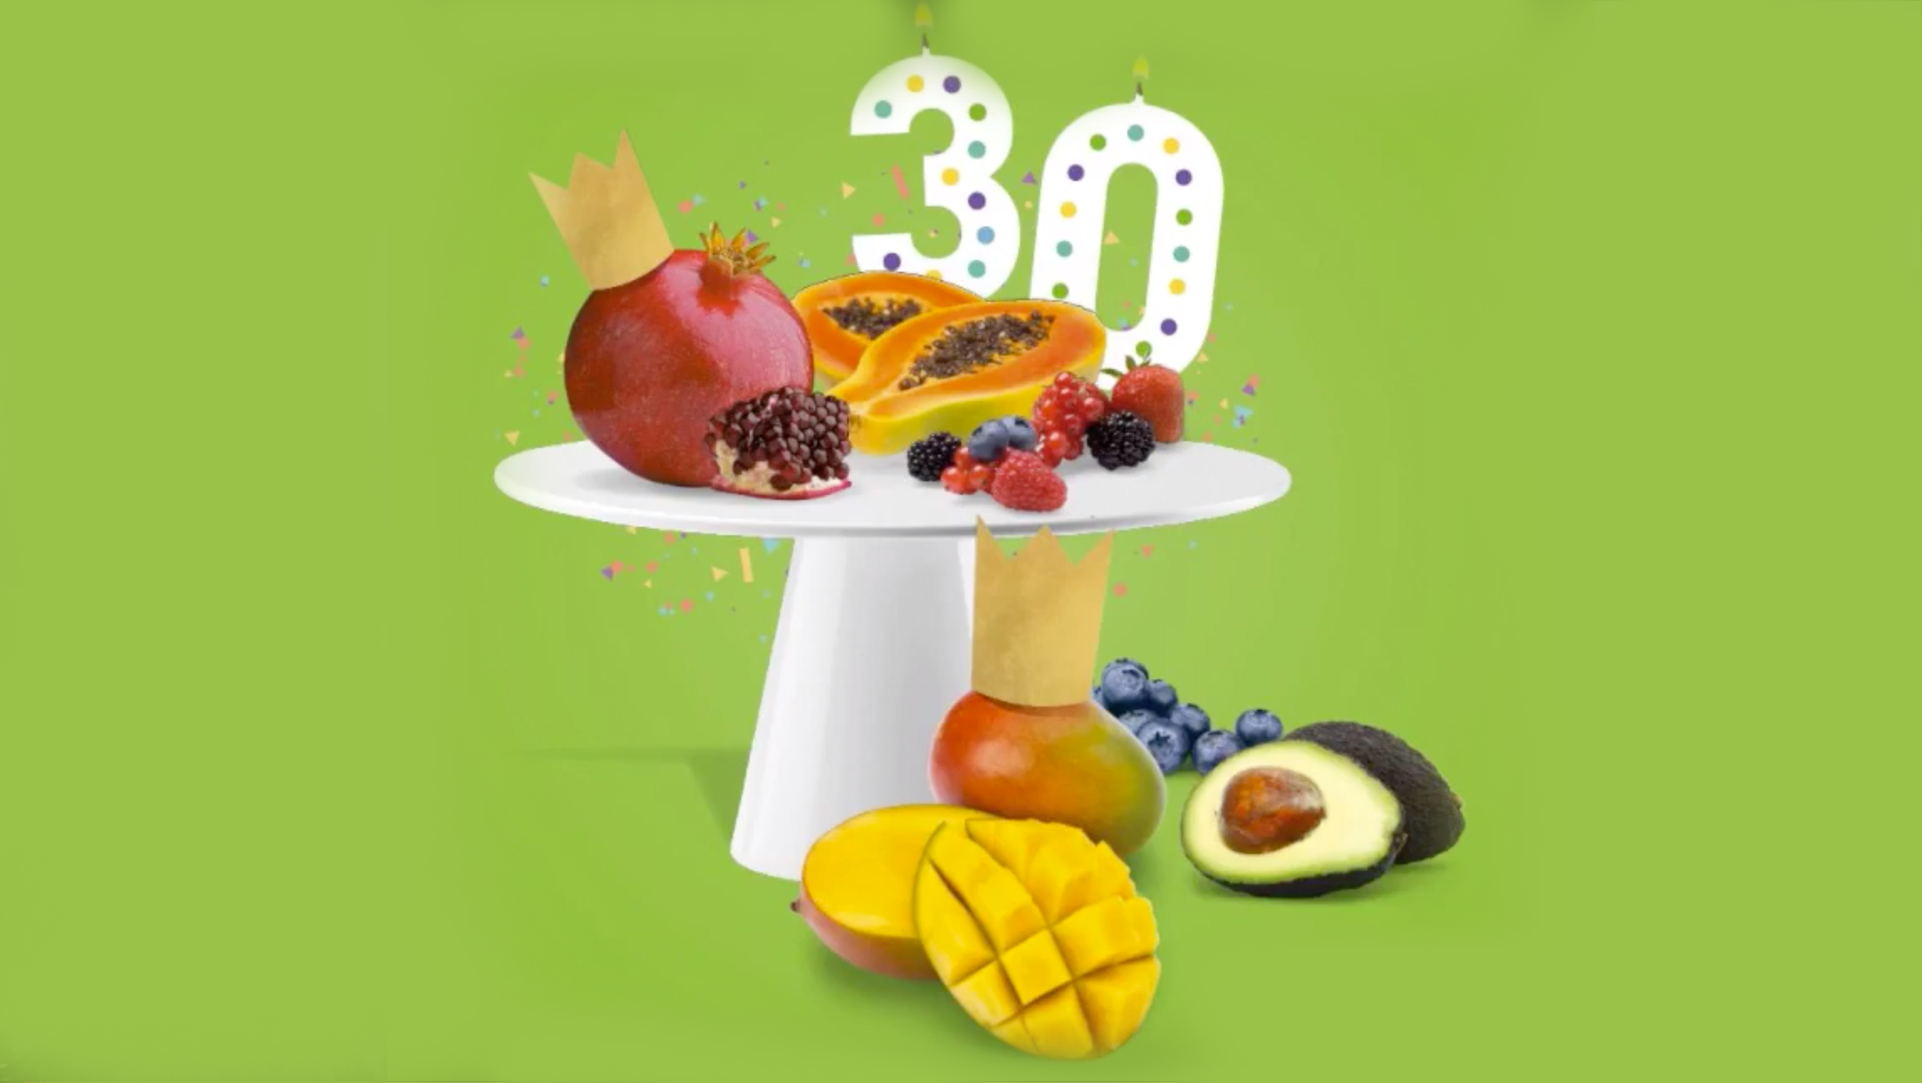 Special Fruit 30 years